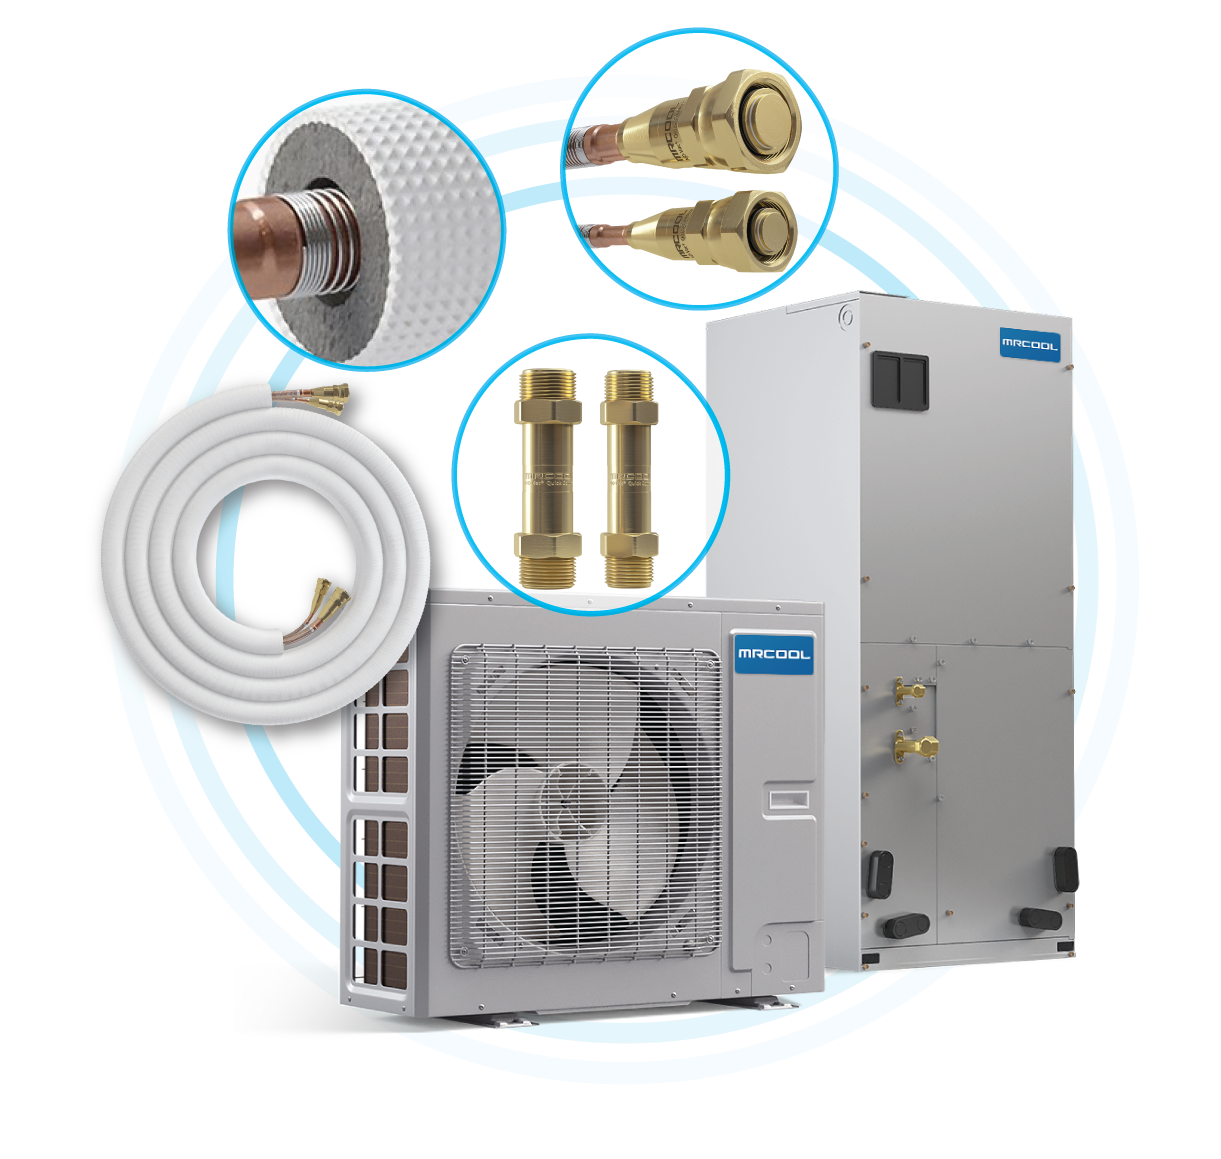 MRCOOL central heat pump condenser, air handler, and quick connect system.